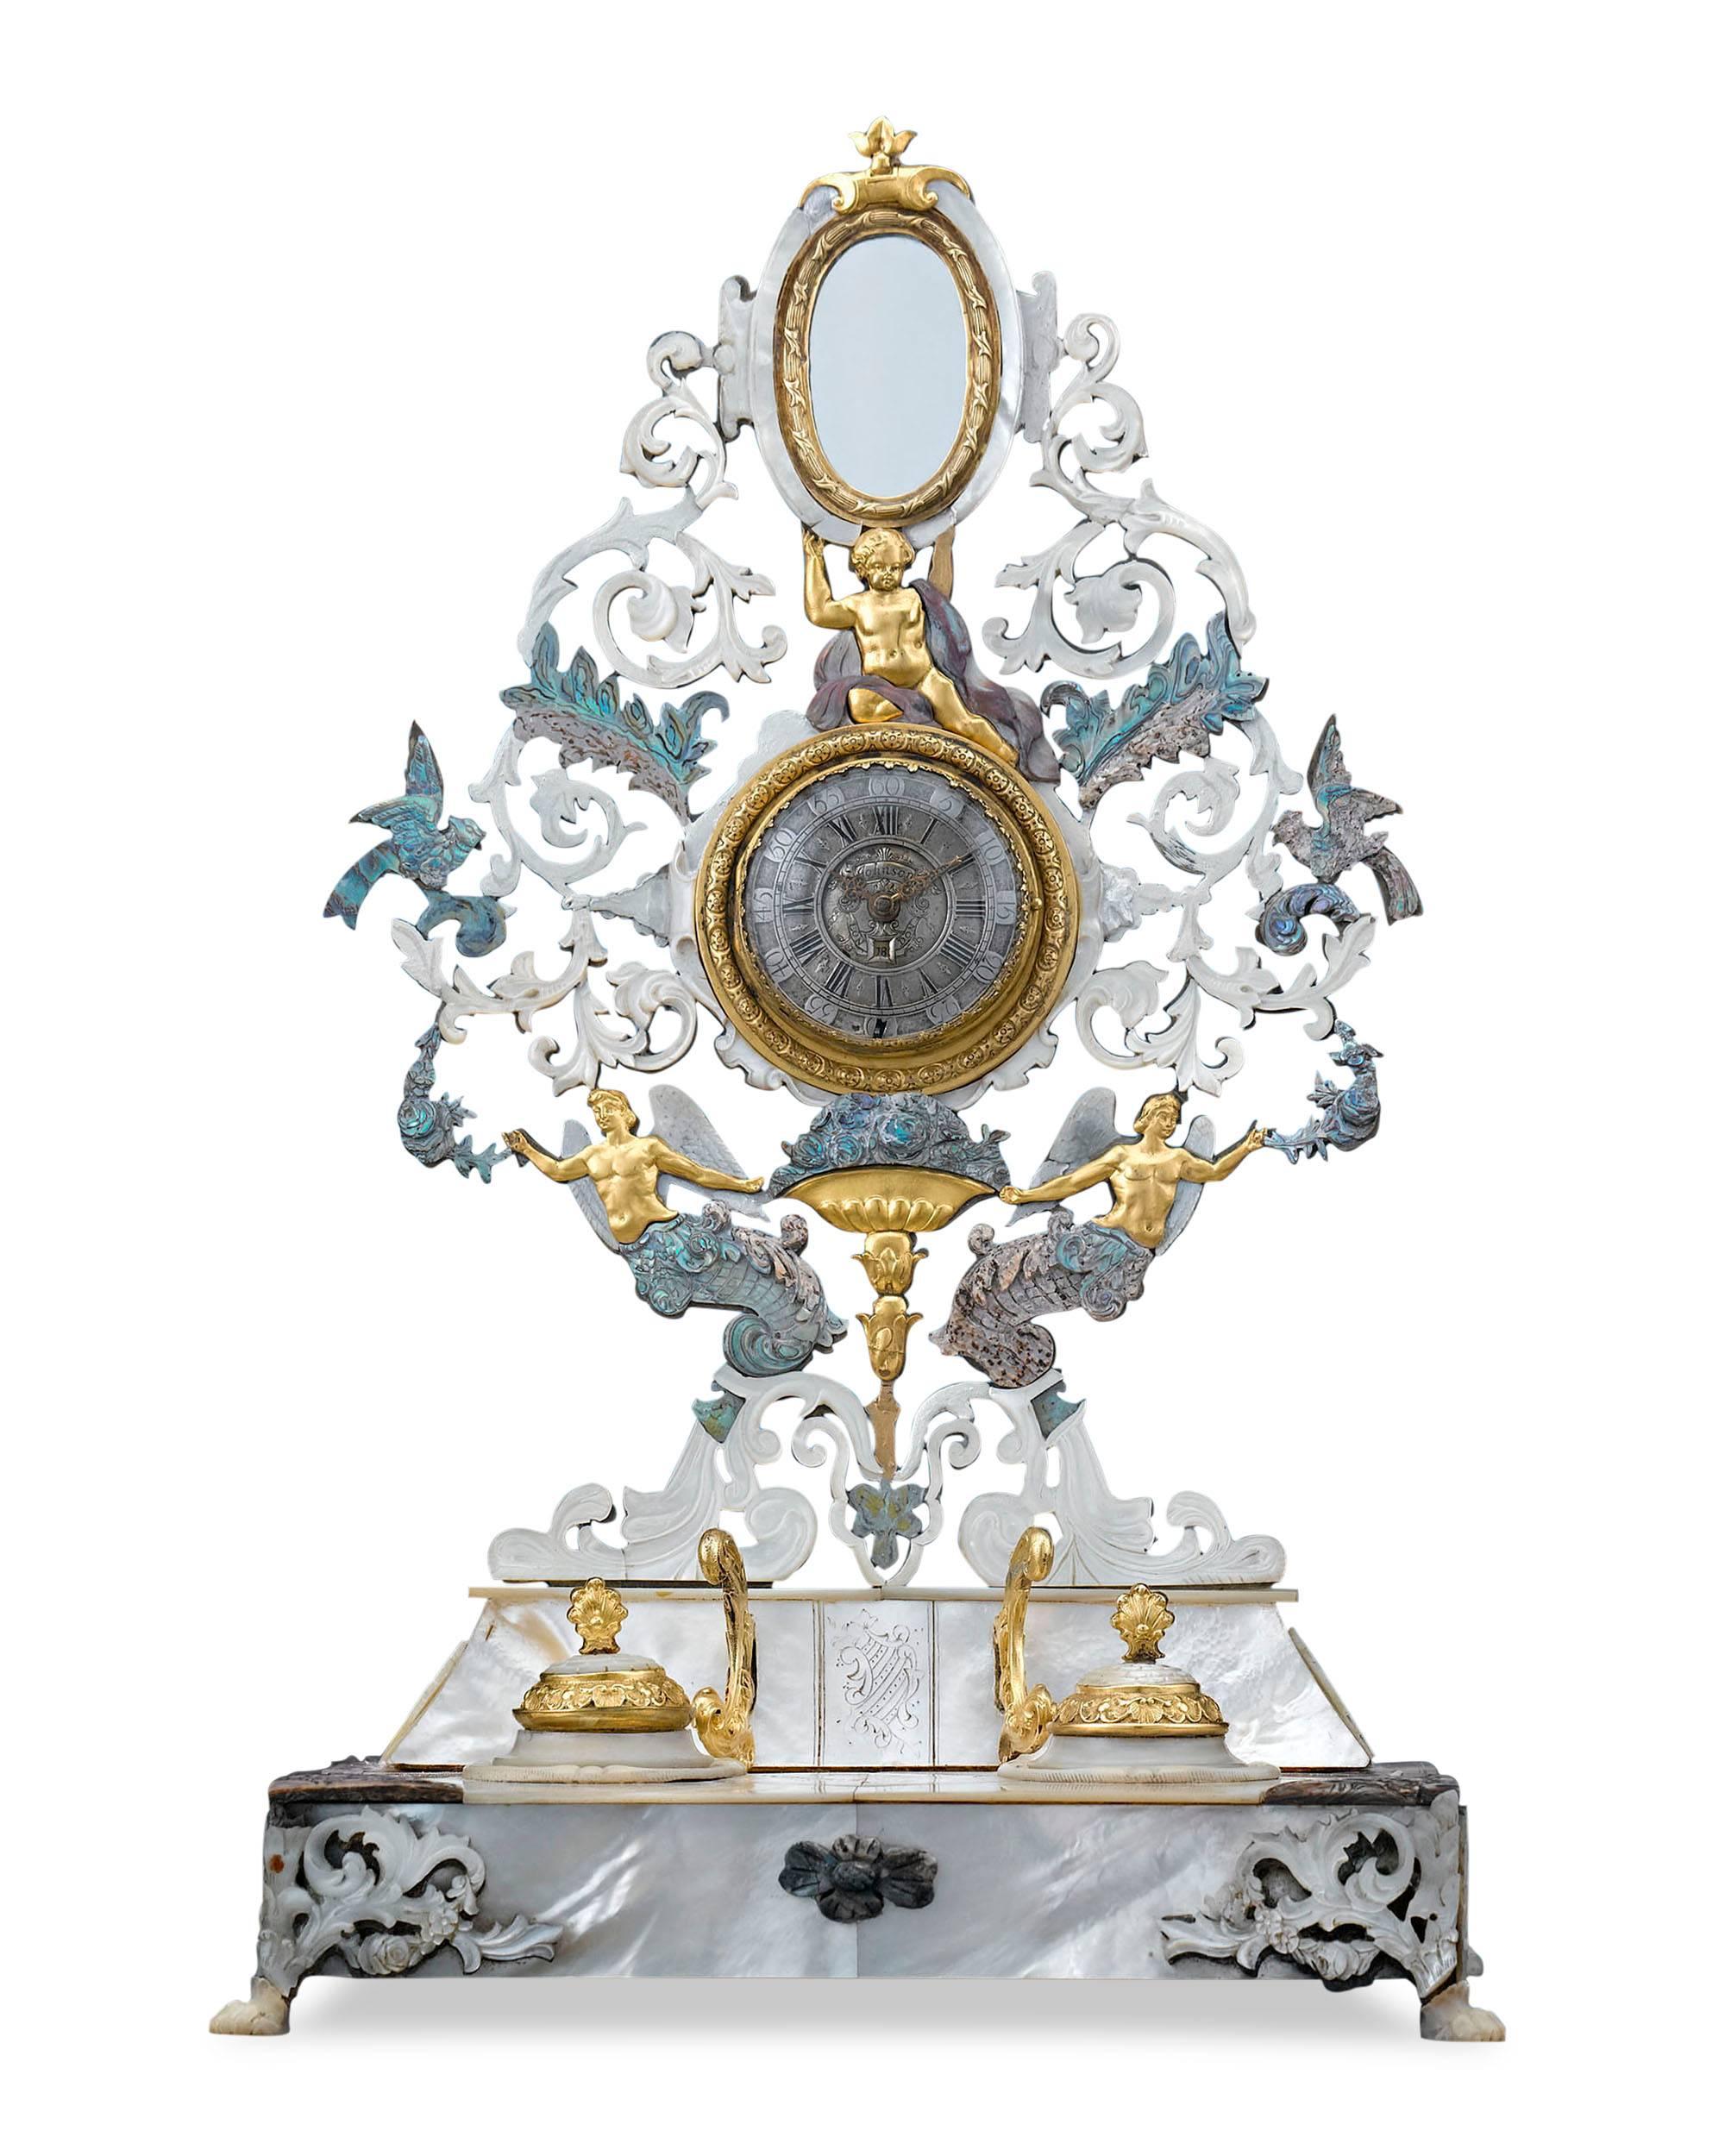 Shimmering mother-of-pearl envelopes this outstanding watch holder and inkwell. The magnificently detailed, pierced screen secures a timepiece and diminutive mirror, while the base holds the removable inkpots and watch-holder mountings. Doré bronze